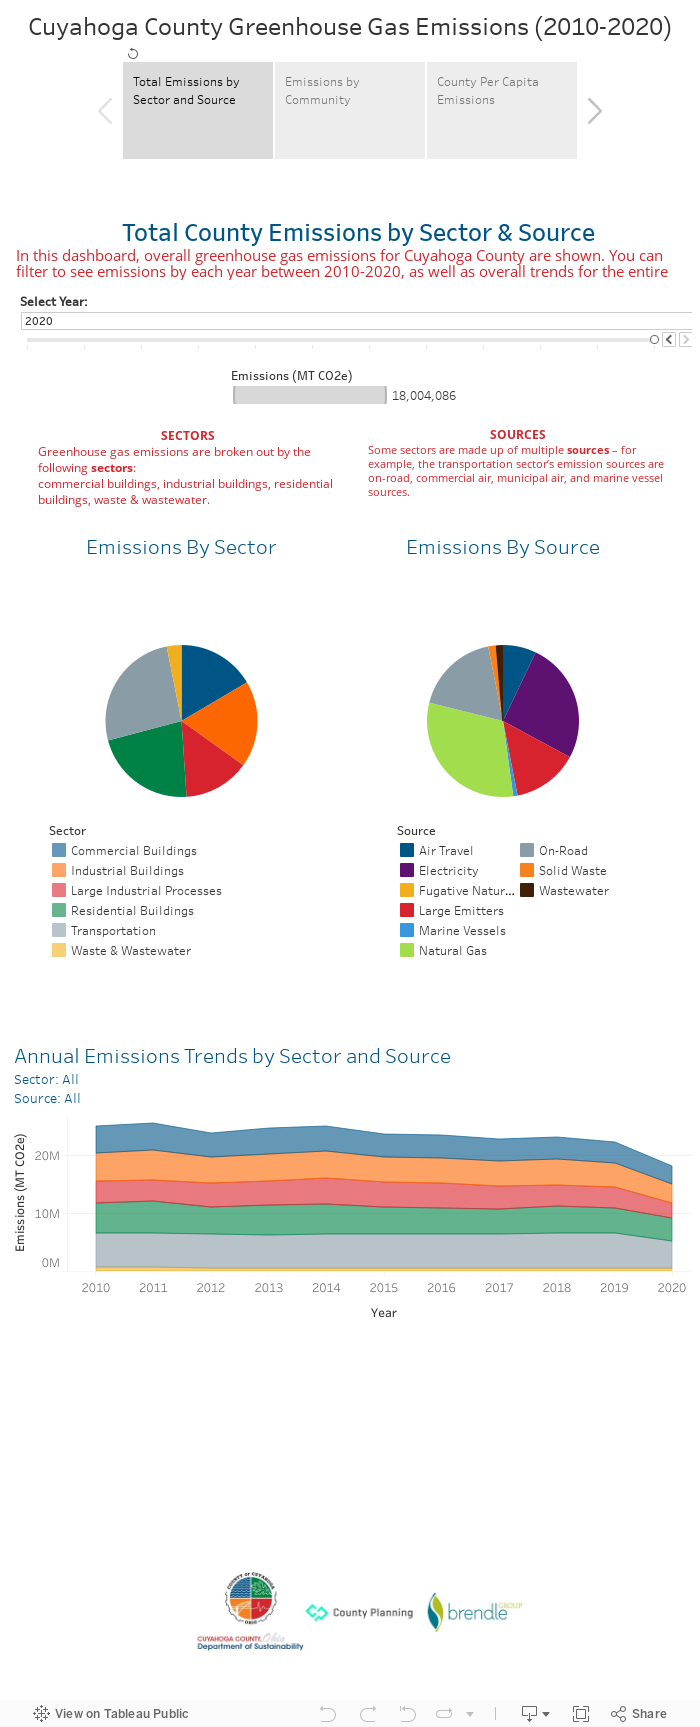 Cuyahoga County Greenhouse Gas Emissions (2010-2019) 